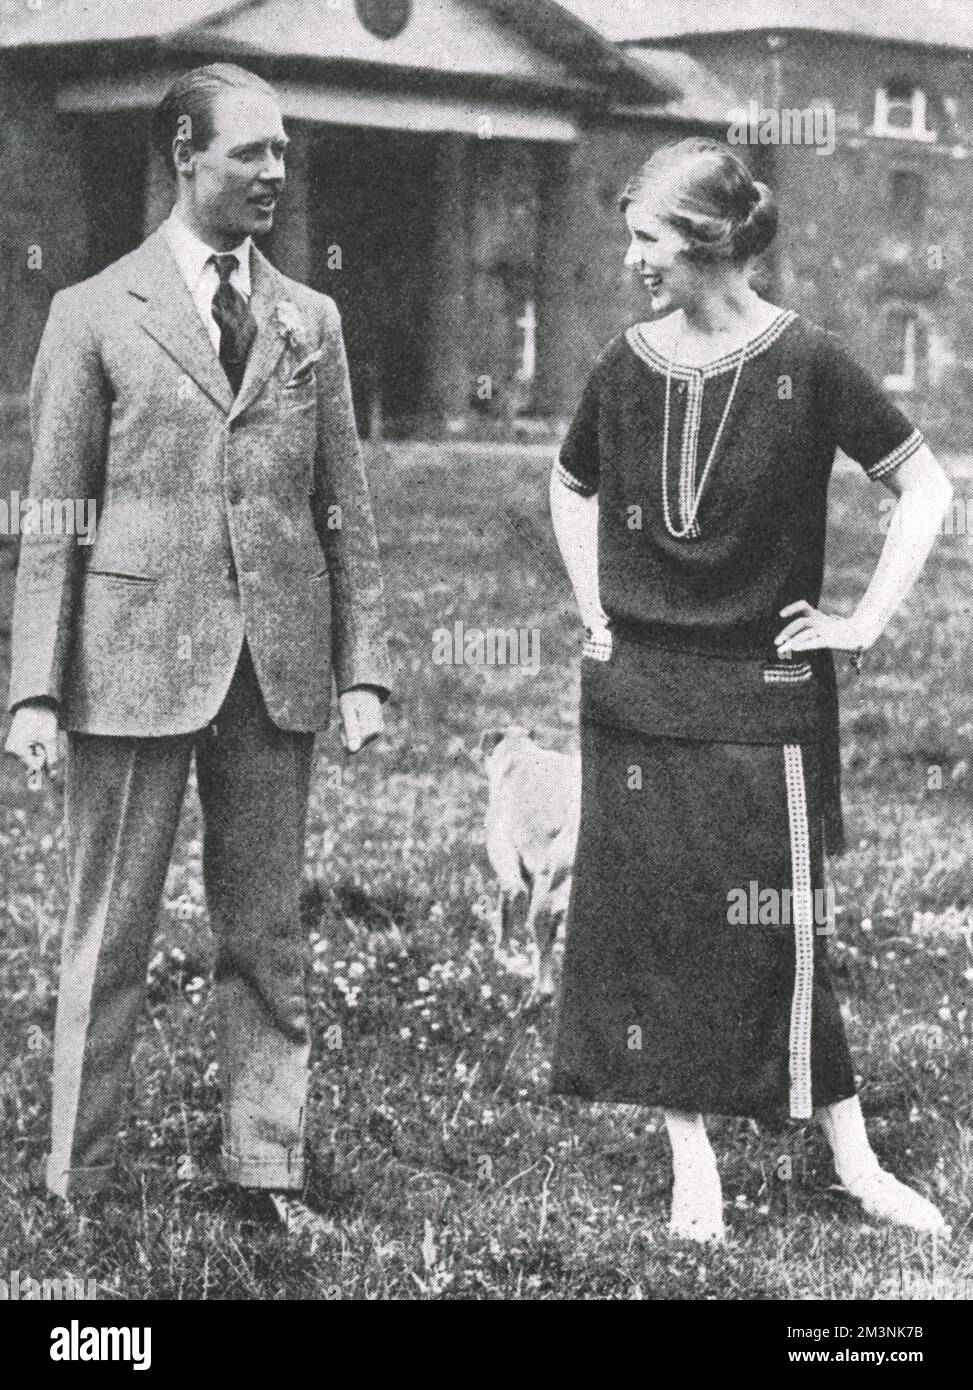 Albert Edward John Spencer, 7th Earl Spencer (23 May 1892  9 June 1975), known formally as The Hon Albert Spencer until 1910 and from then until 1922 as Viscount Althorp, and less formally as 'Jack' Spencer, pictured with his wife, Countess Spencer, formerly Cynthia Elinor Beatrix Hamilton, daughter of the 3rd Due of Abercorn. They were the paternal grandparents of Diana, Princess of Wales and great grandparents of Prince William of Wales  Picture on the occasion of the visit of the American Bar Association to Sulgrave Manor, Northamptonshire, the home of the Washington family.     Date: 1924 Stock Photo